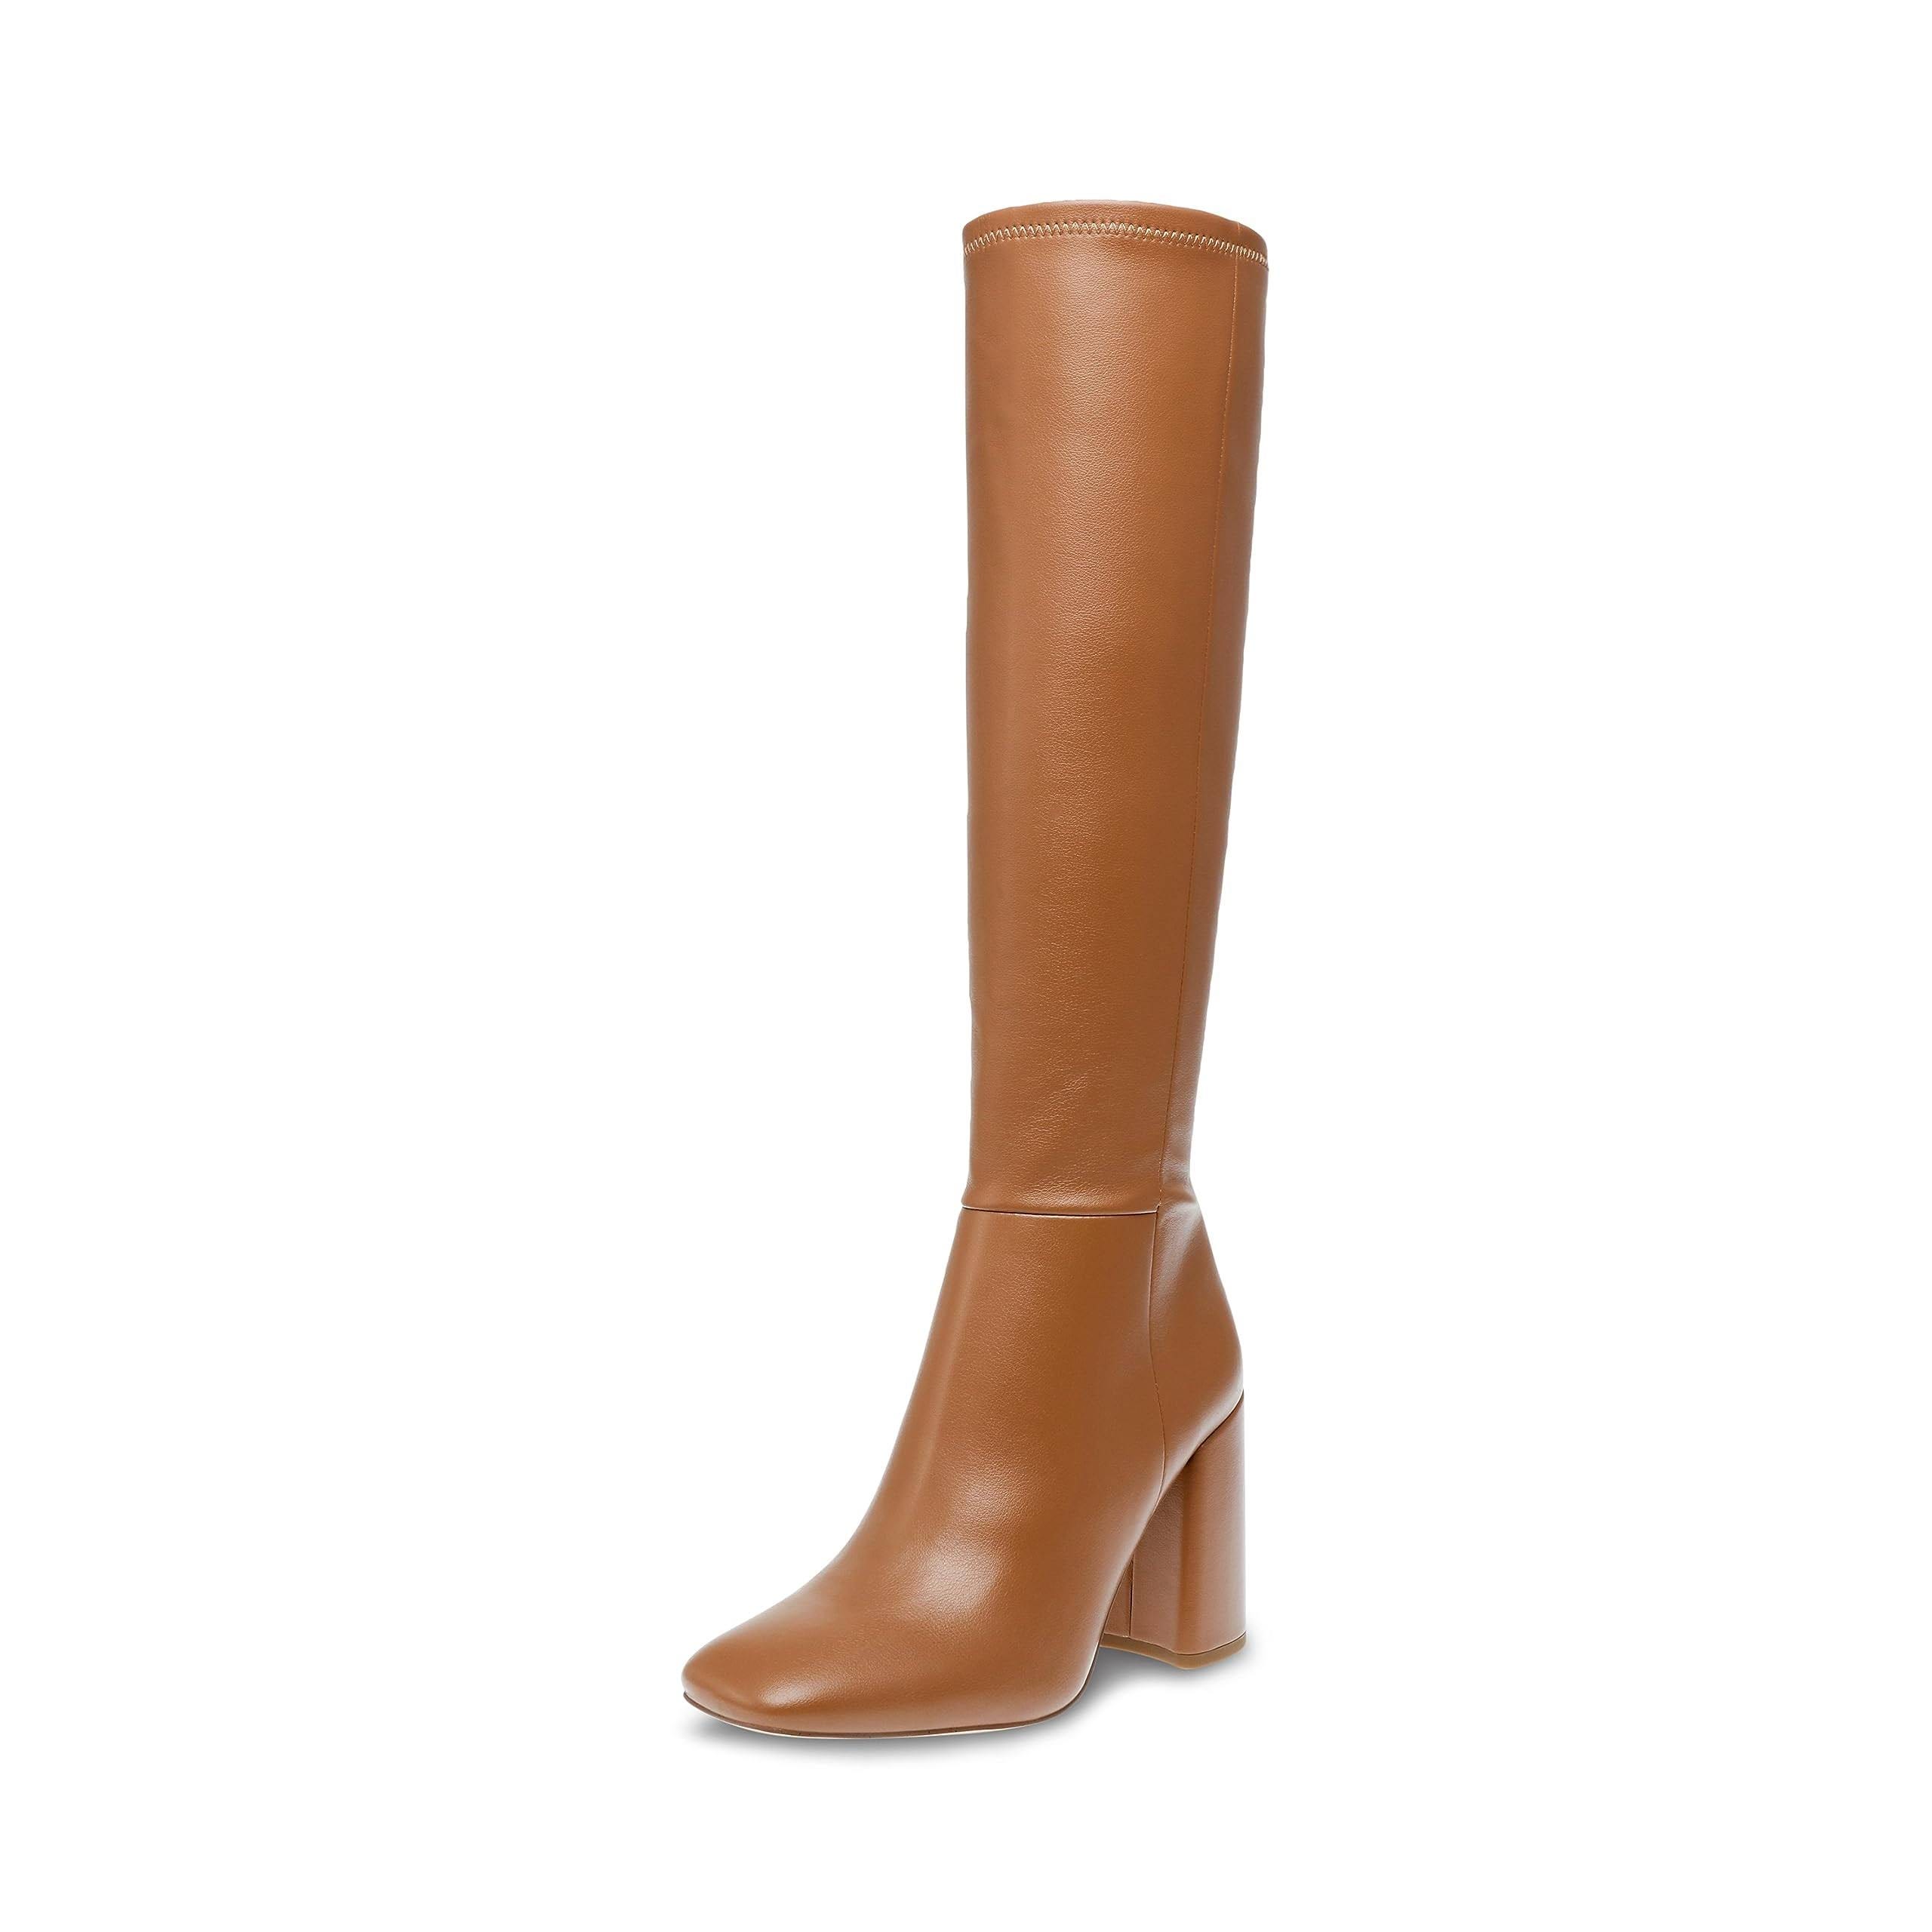 Classy Beige Knee High Boots with Comfortable Fit | Image